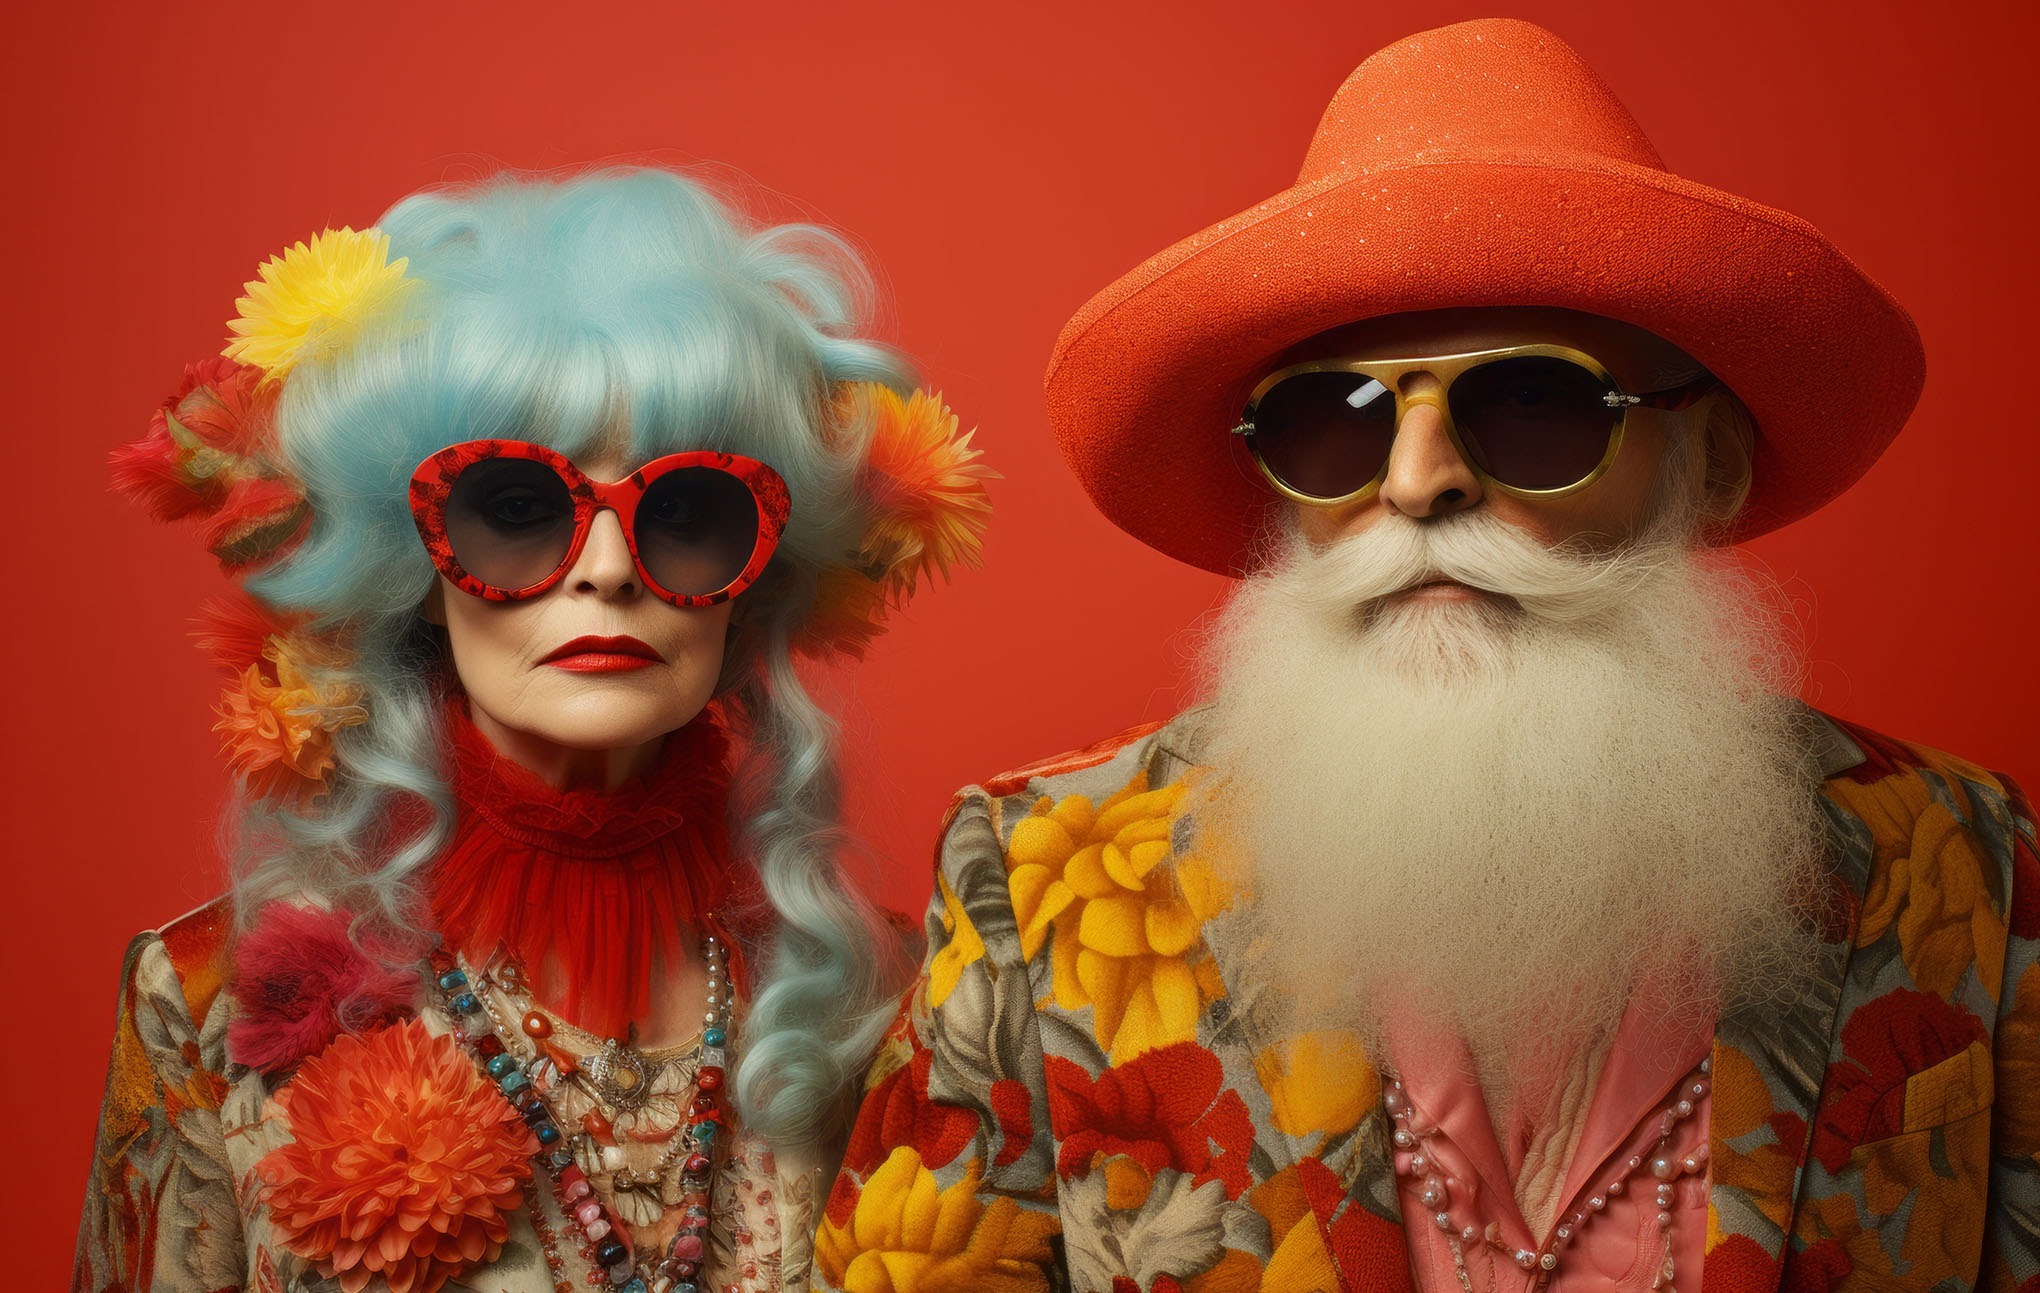 Two flamboyantly dressed senior models posing against a red background, featuring colorful outfits and accessible accessories.